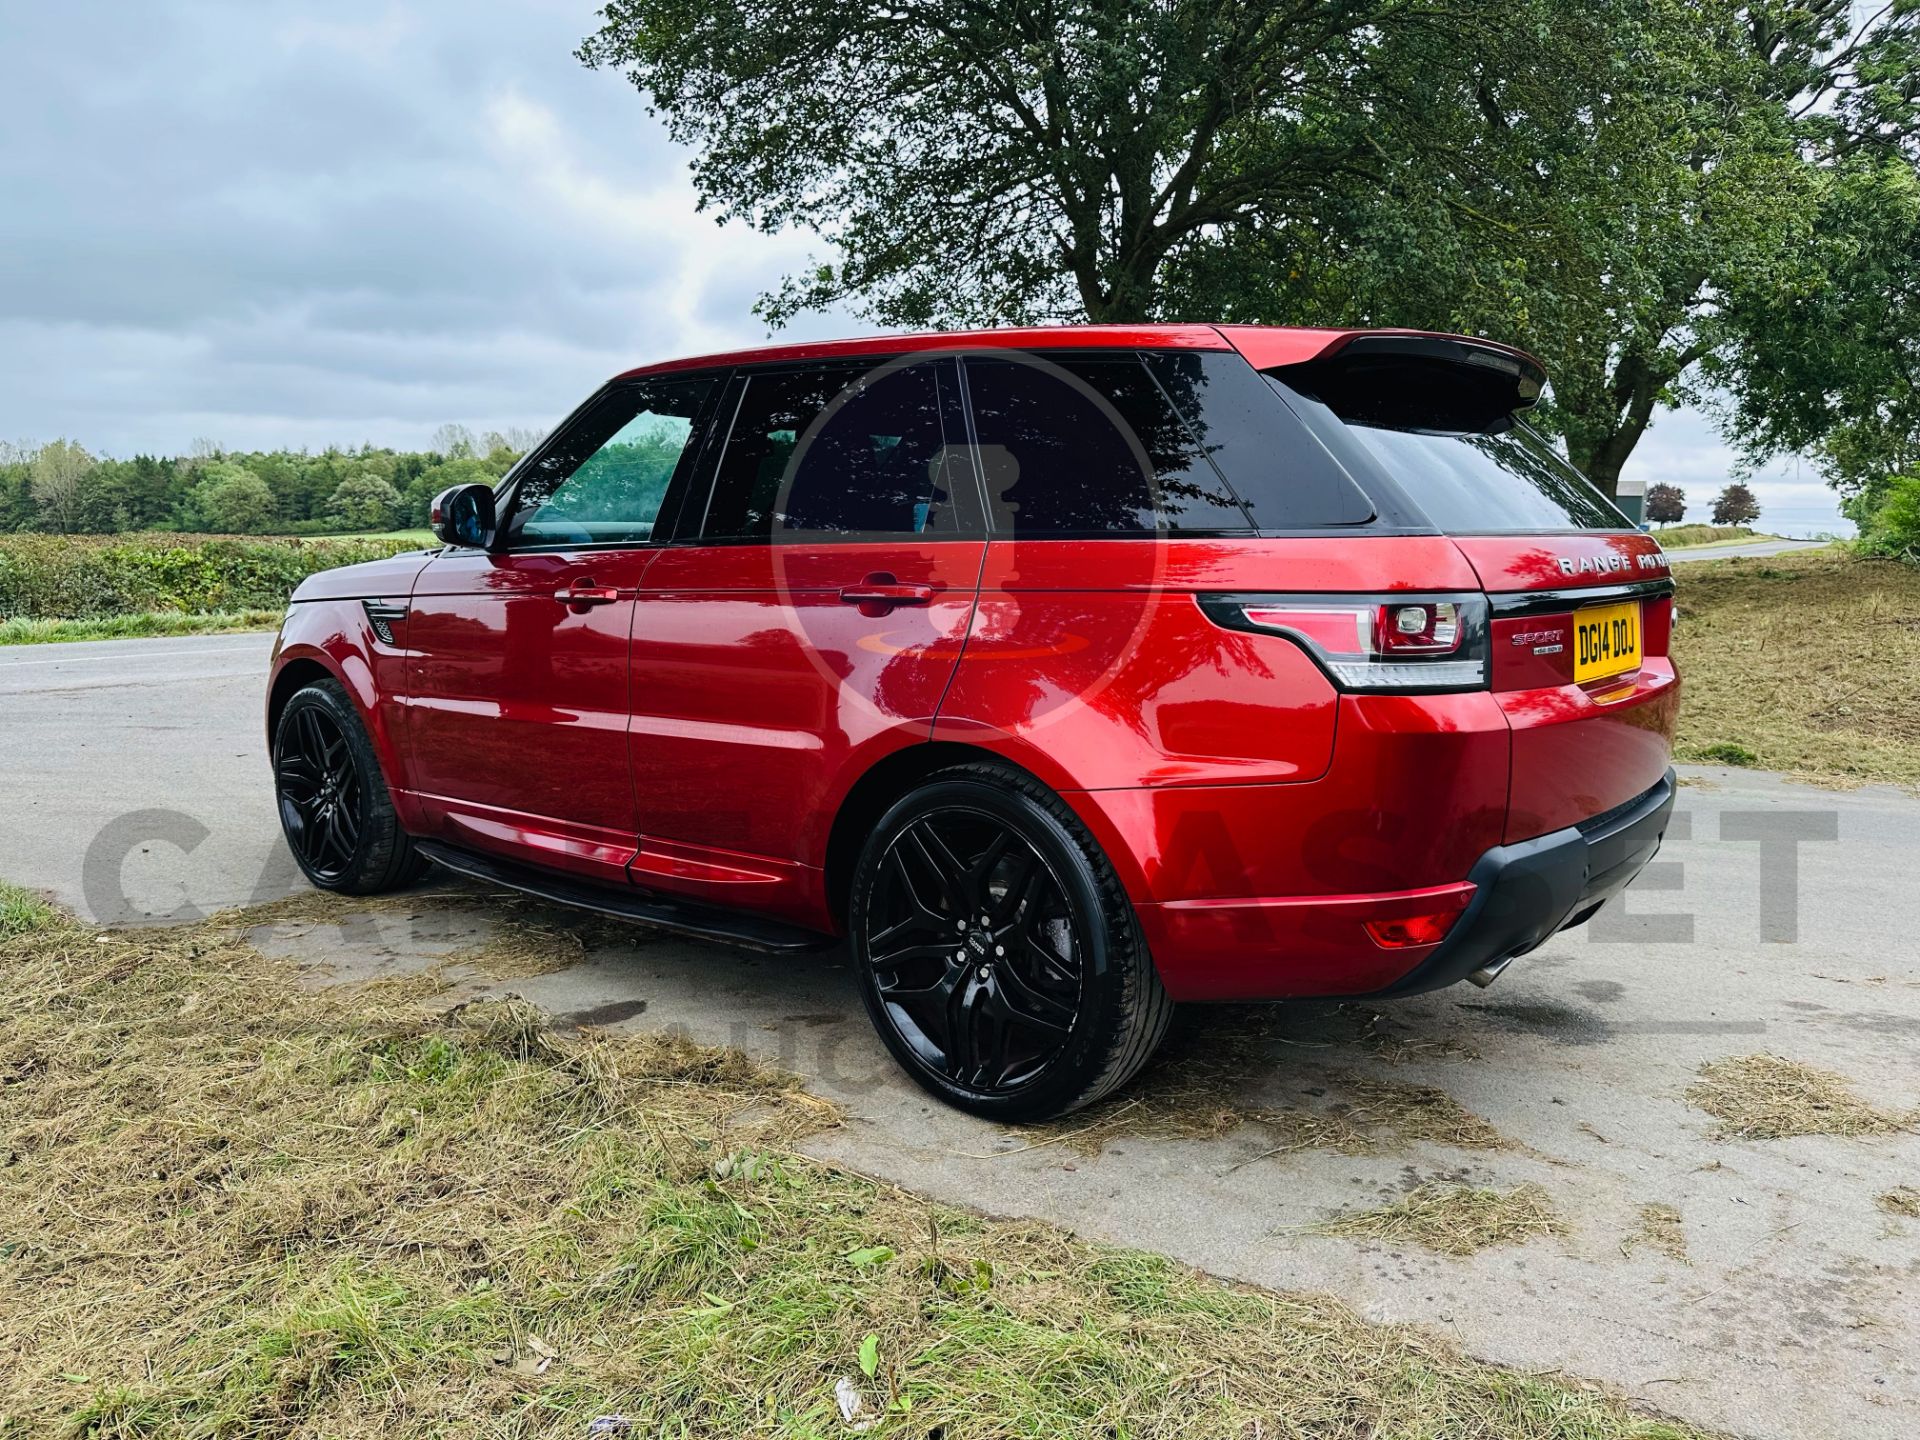 (On Sale) RANGE ROVER SPORT *HSE EDTION* 7 SEATER SUV (2014) 3.0 SDV6 - 8 SPEED AUTOMATIC (NO VAT) - Image 7 of 35